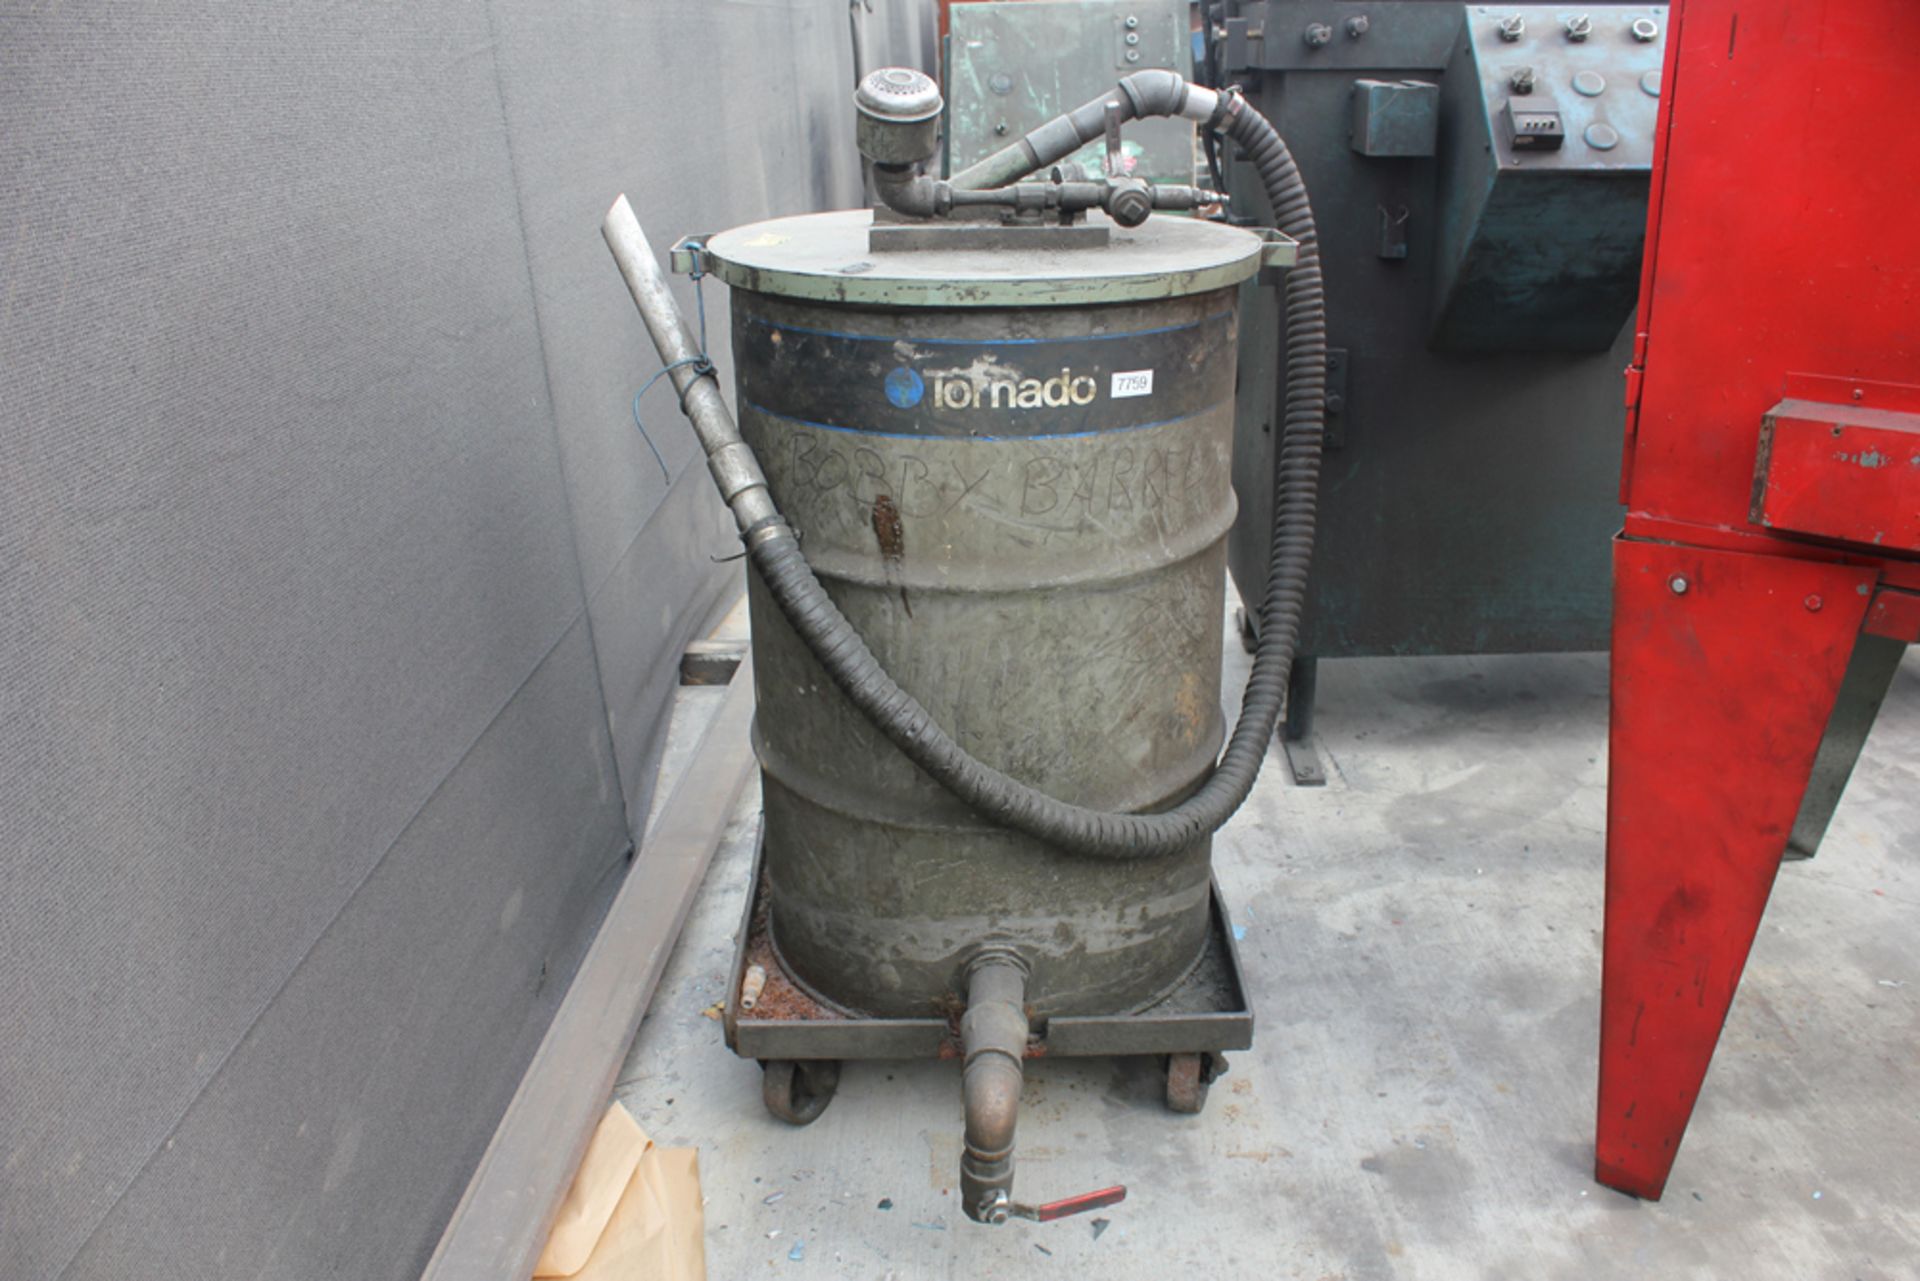 Tornado Industrial Pneumatic Wet Vacuum 55 Gallon. LOADING FEE FOR THIS LOT: $75